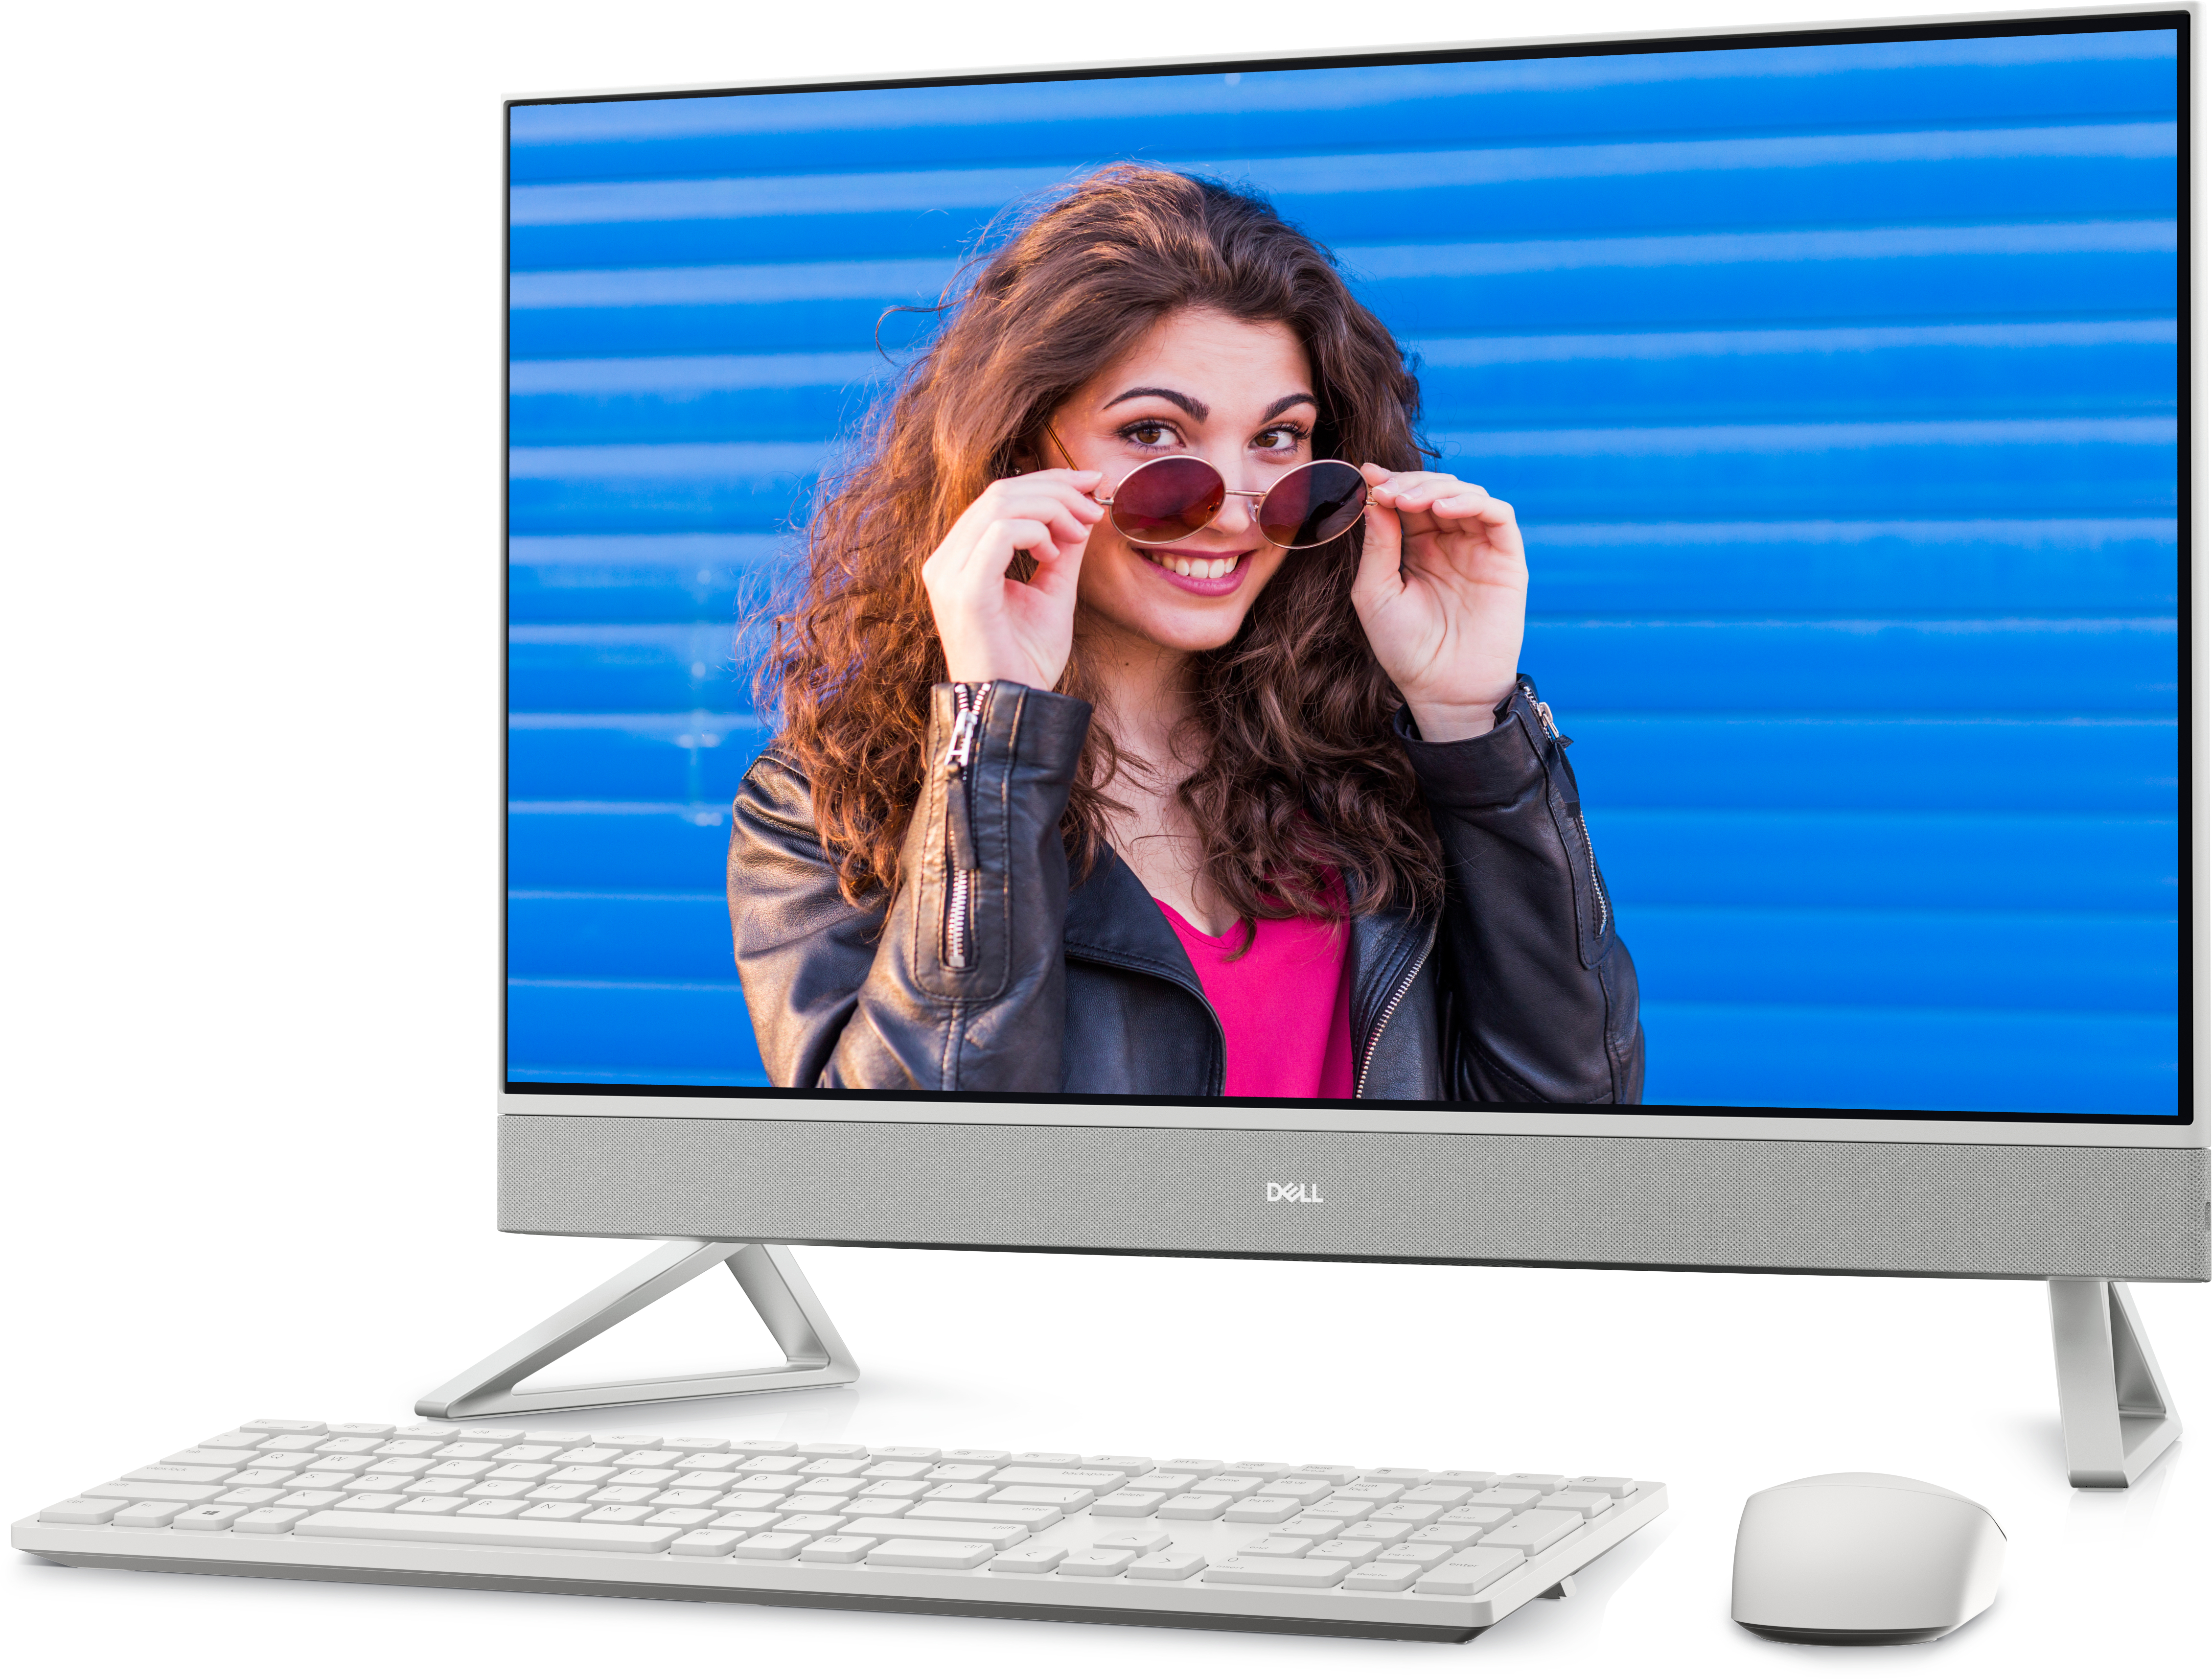 New Inspiron 27 All-in-One (Intel)